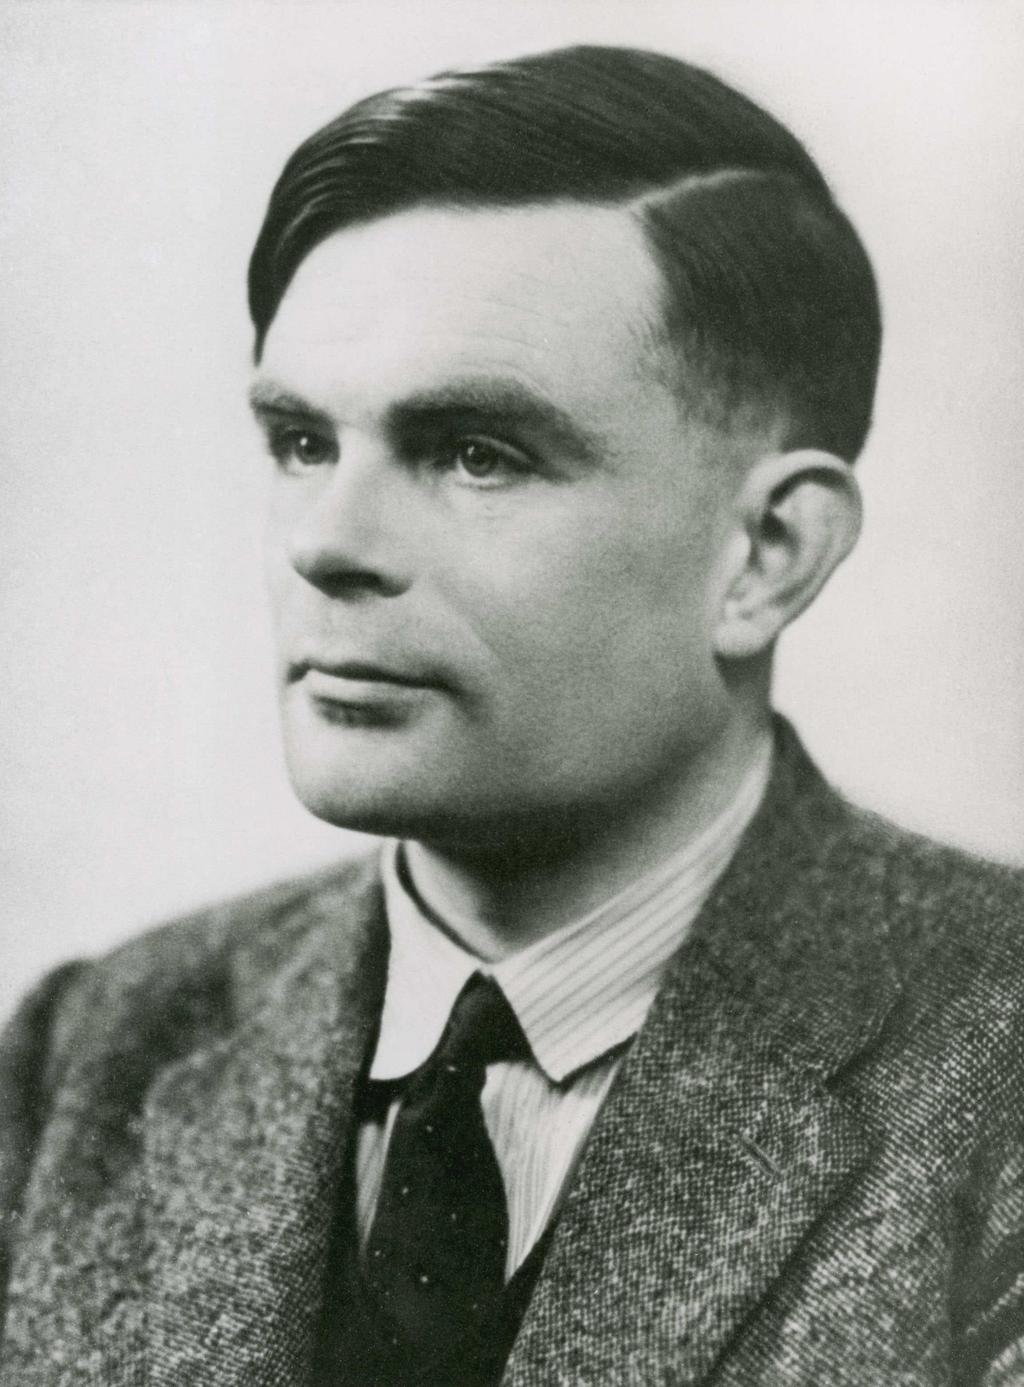 every mathematical formula Alan Turing (1936, few months after Church) solves the same problem using machines